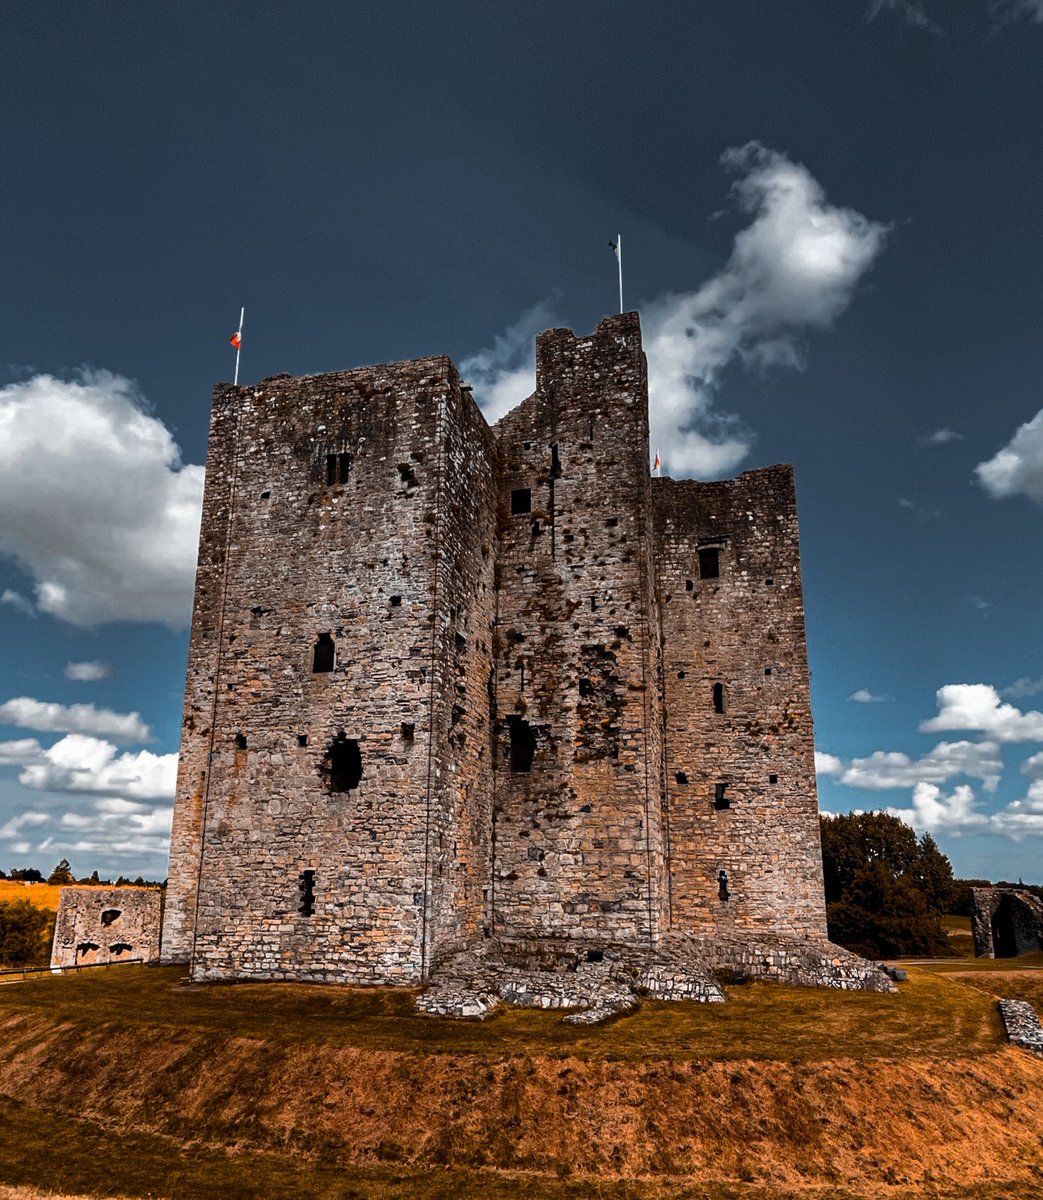 Visited Trim Castle and was blown away by its impressive architecture and rich history! A must-see for anyone interested in medieval castles and Irish heritage. #TrimCastle #IrishHistory #MedievalArchitecture #Braveheart